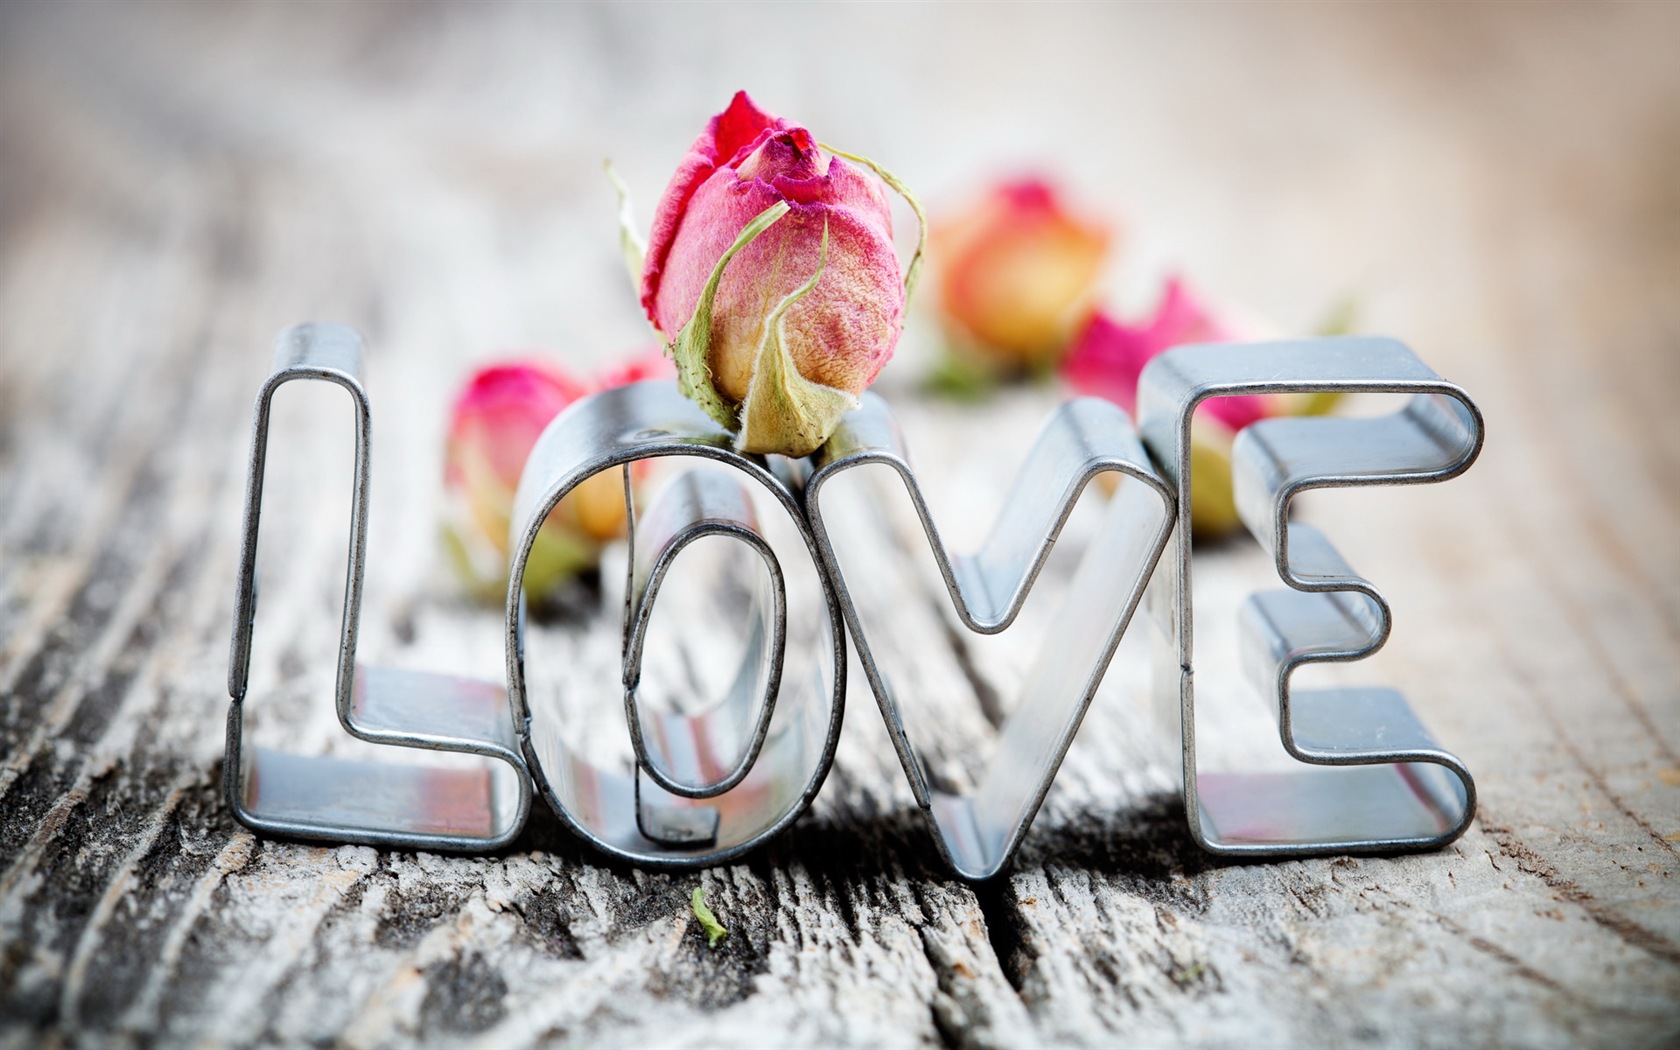 Warm and romantic Valentine's Day HD wallpapers #1 - 1680x1050